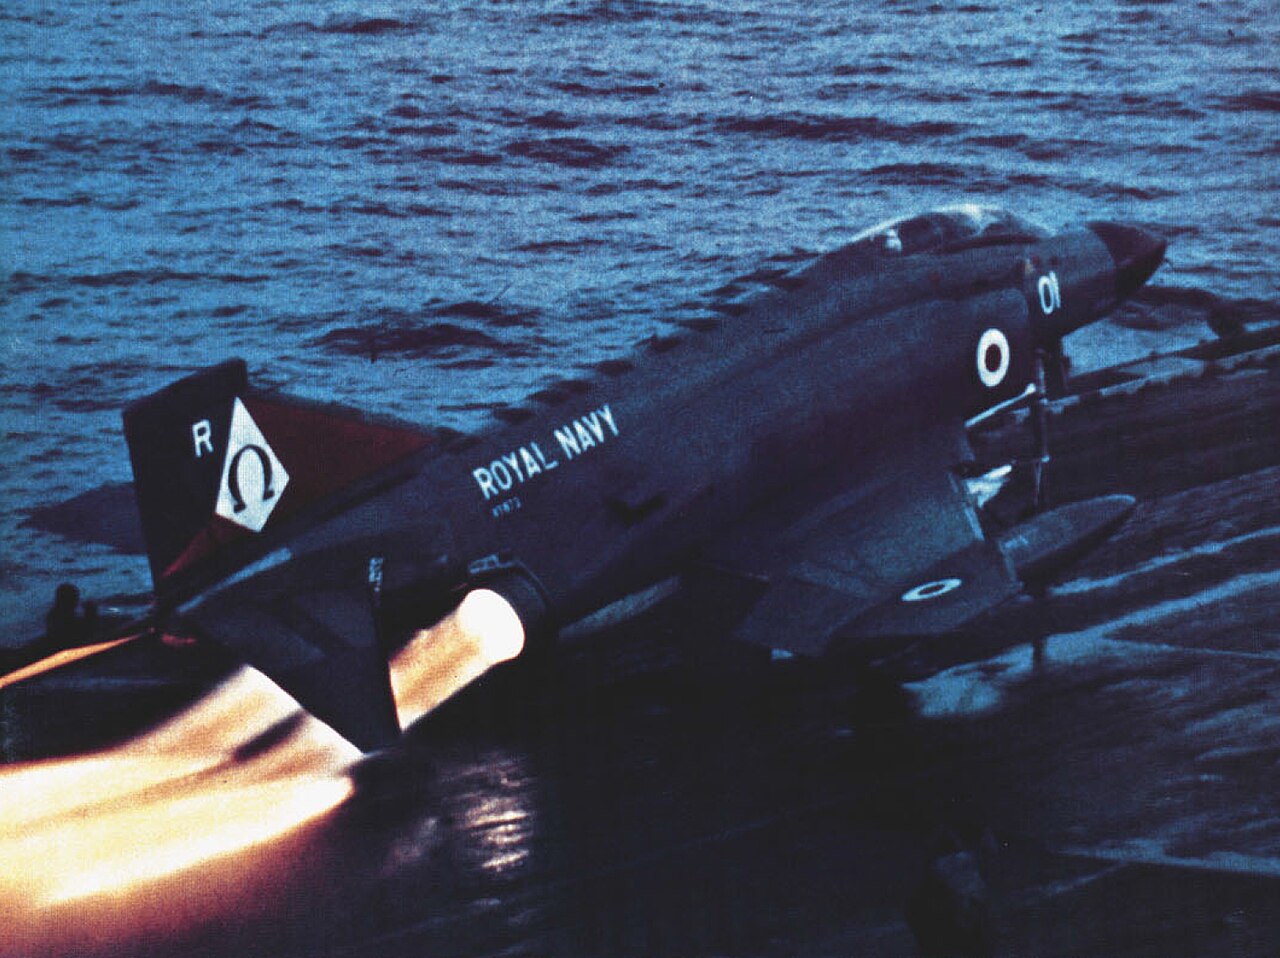 1280px-Phantom_FG1_of_892_NAS_is_launched_from_USS_Independence_(CV-62)%2C_November_1975.jpg